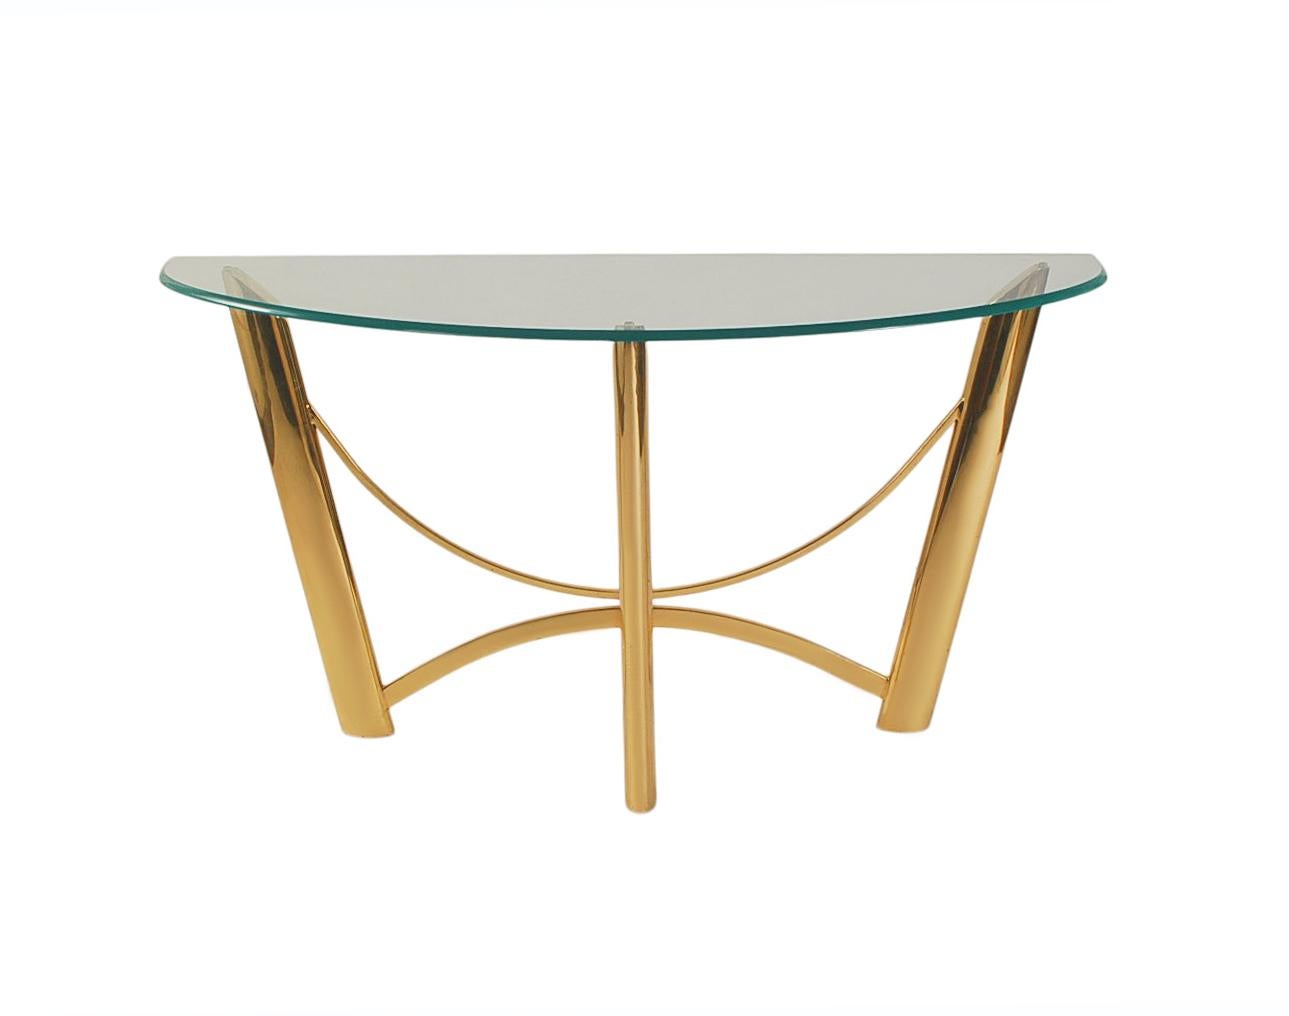 Late 20th Century Mid-Century Italian Post Modern Brass & Glass Console Table or Sofa Table For Sale